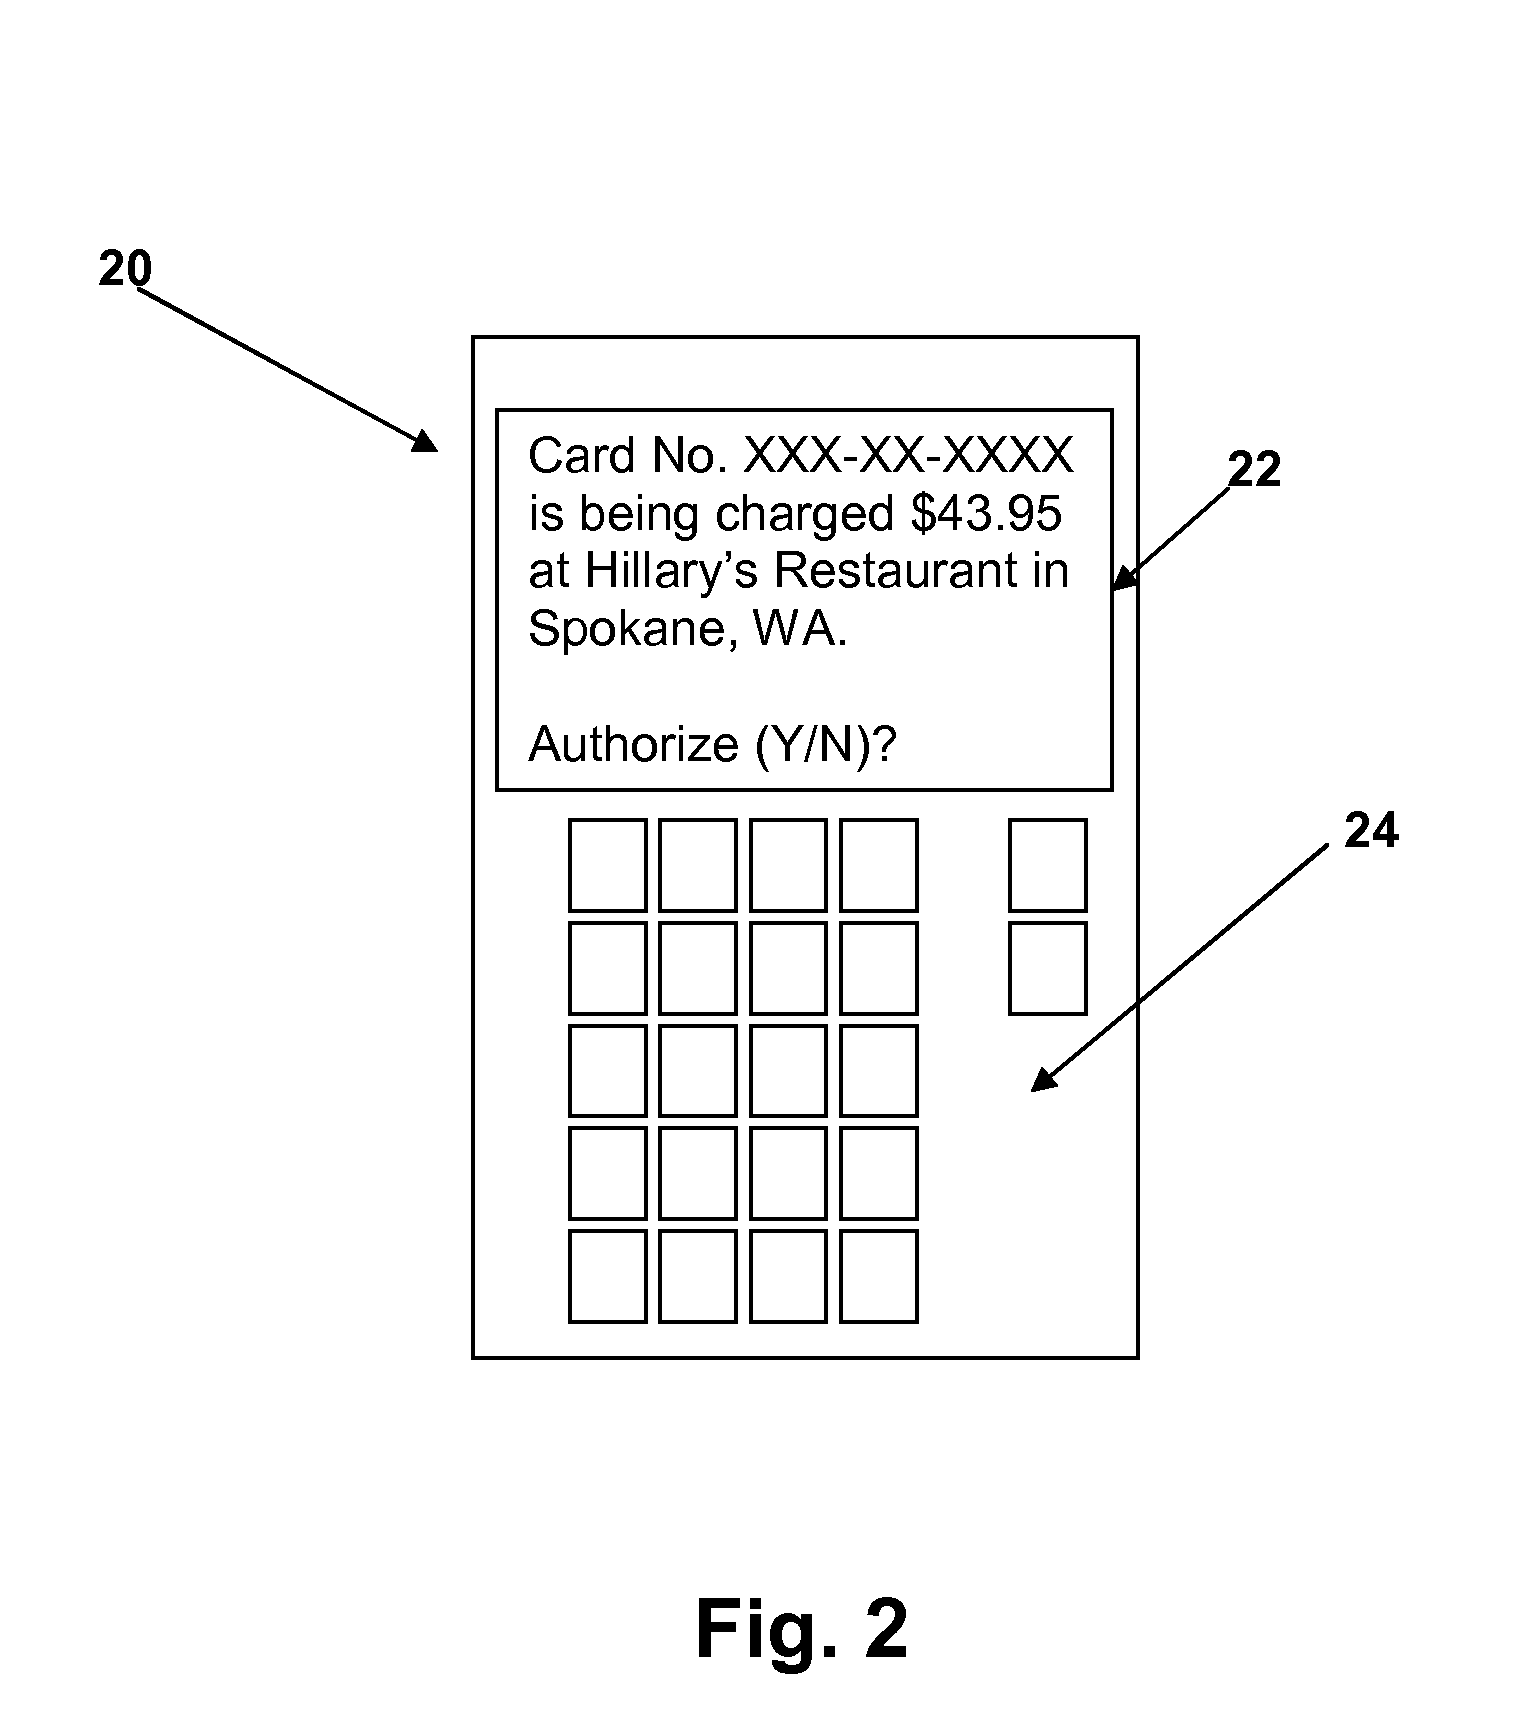 System for securing card payment transactions using a mobile communication device